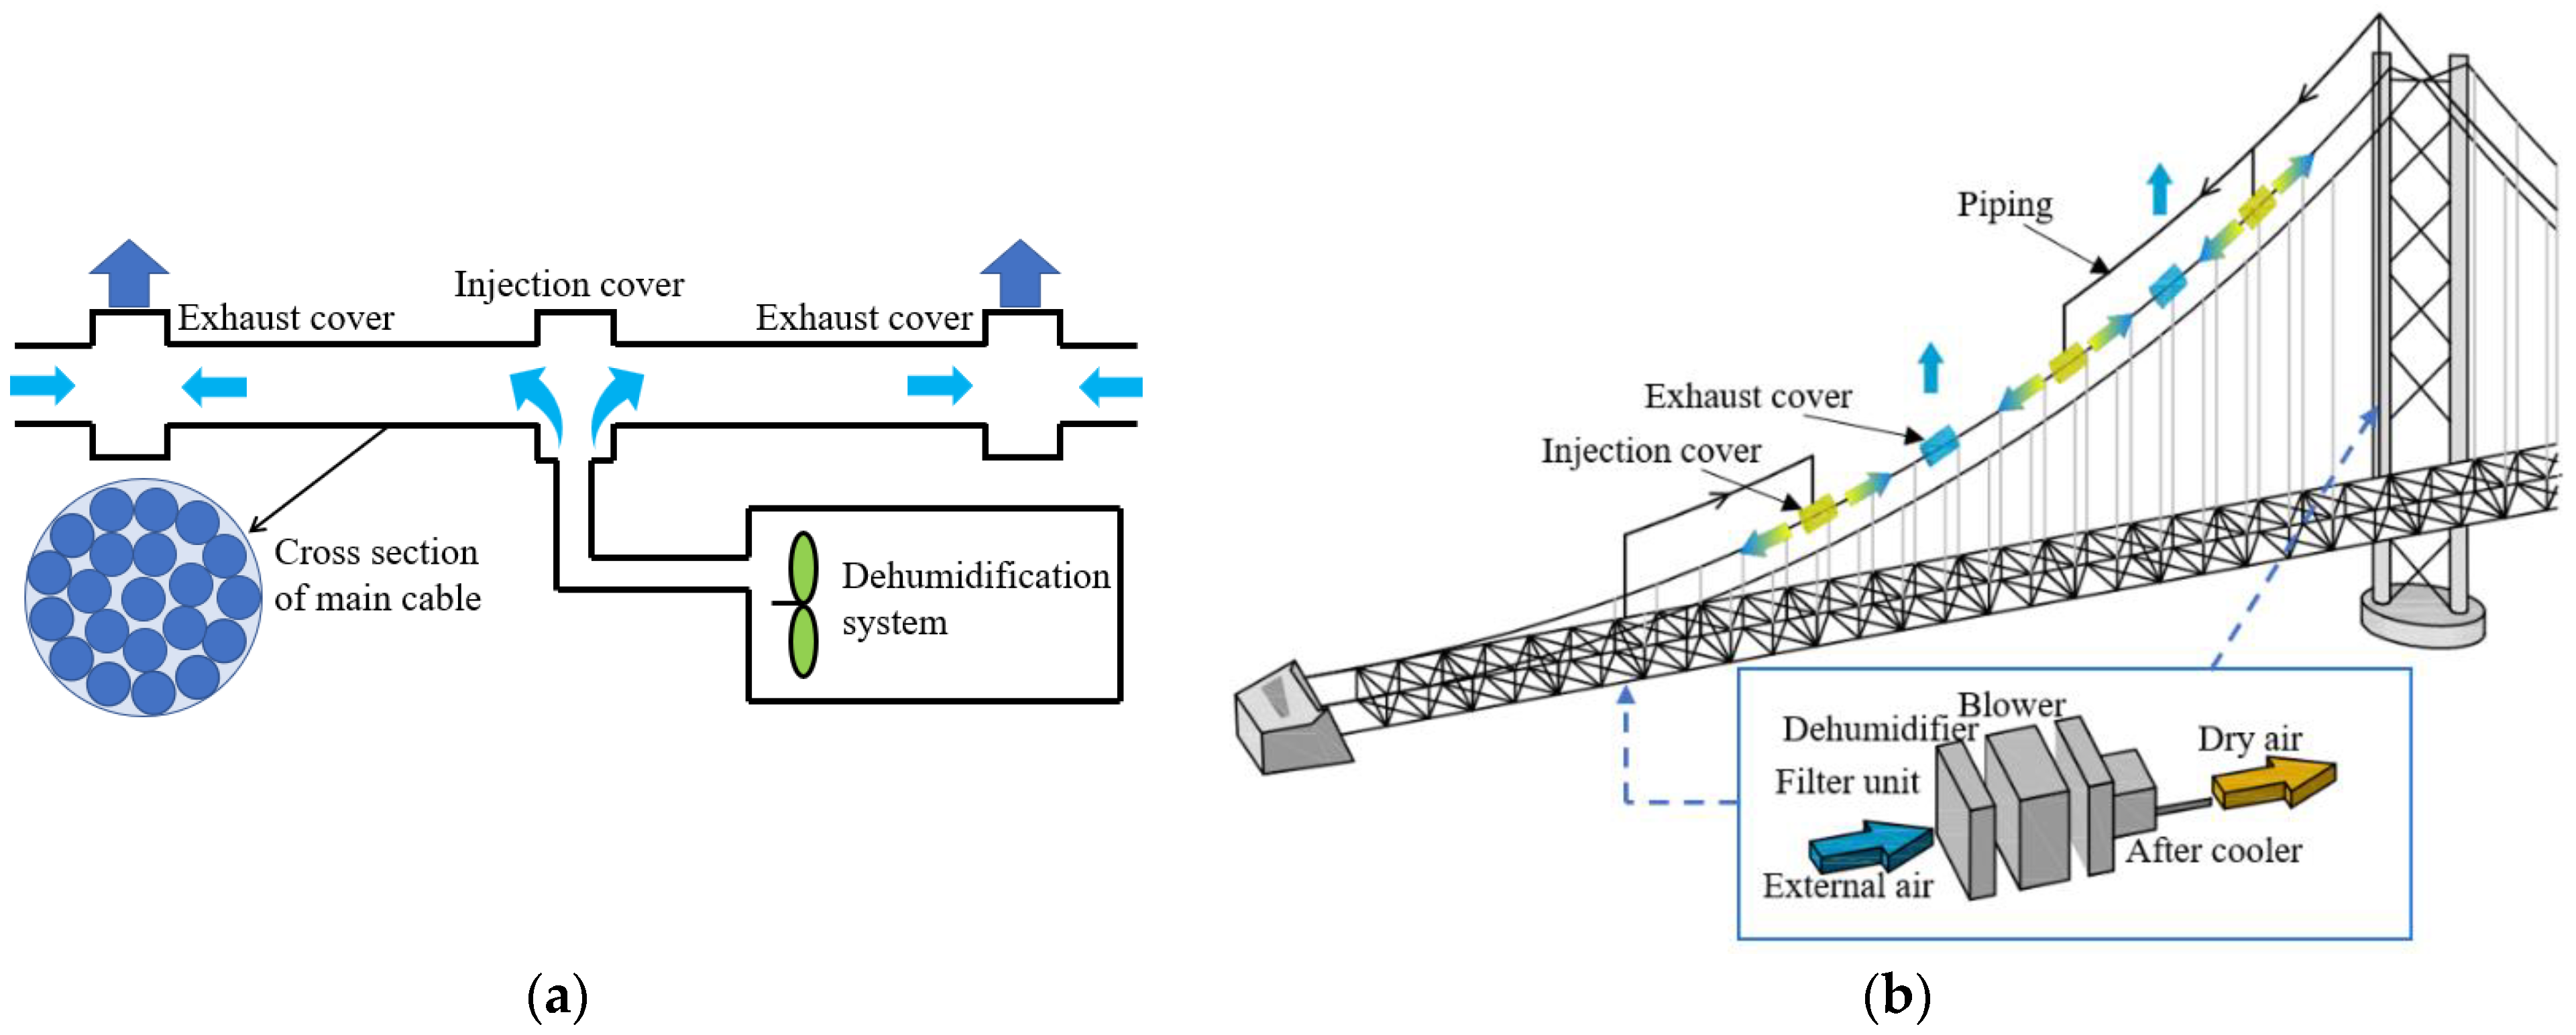 Applied Sciences | Free Full-Text | Performance Analysis of a Hybrid  Dehumidification System Adapted for Suspension Bridge Corrosion Protection:  A Numerical Study